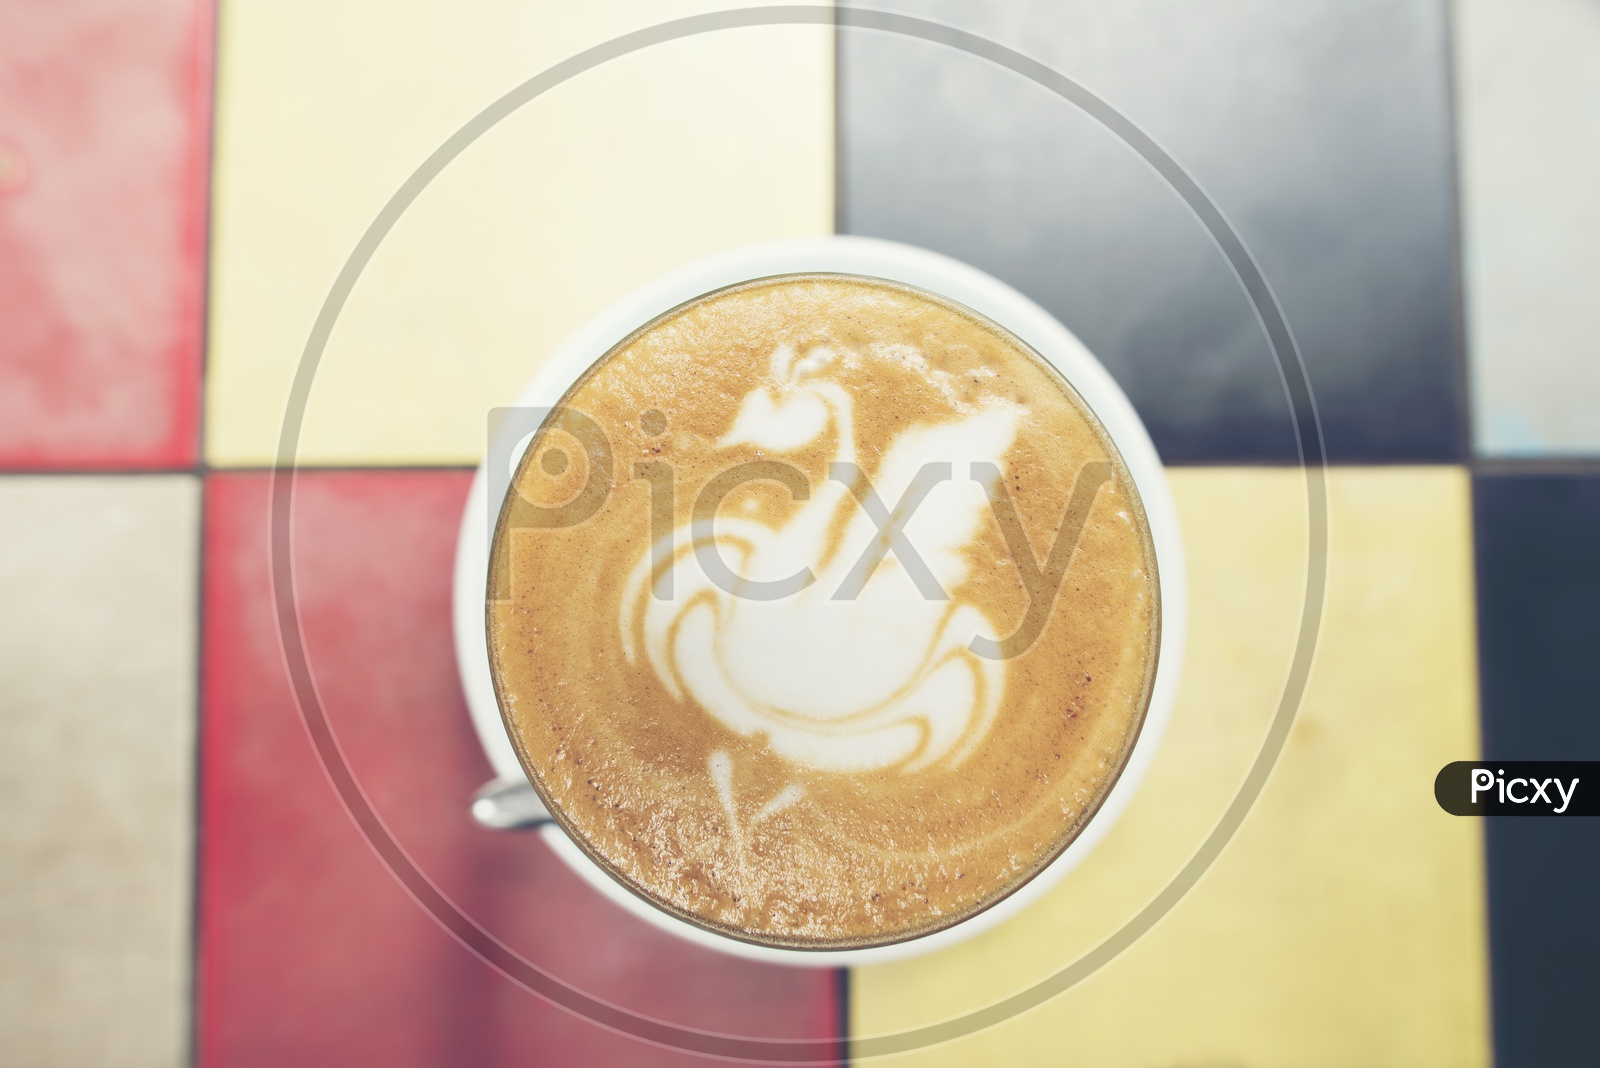 coffee latte art in cafe With Vintage Filter